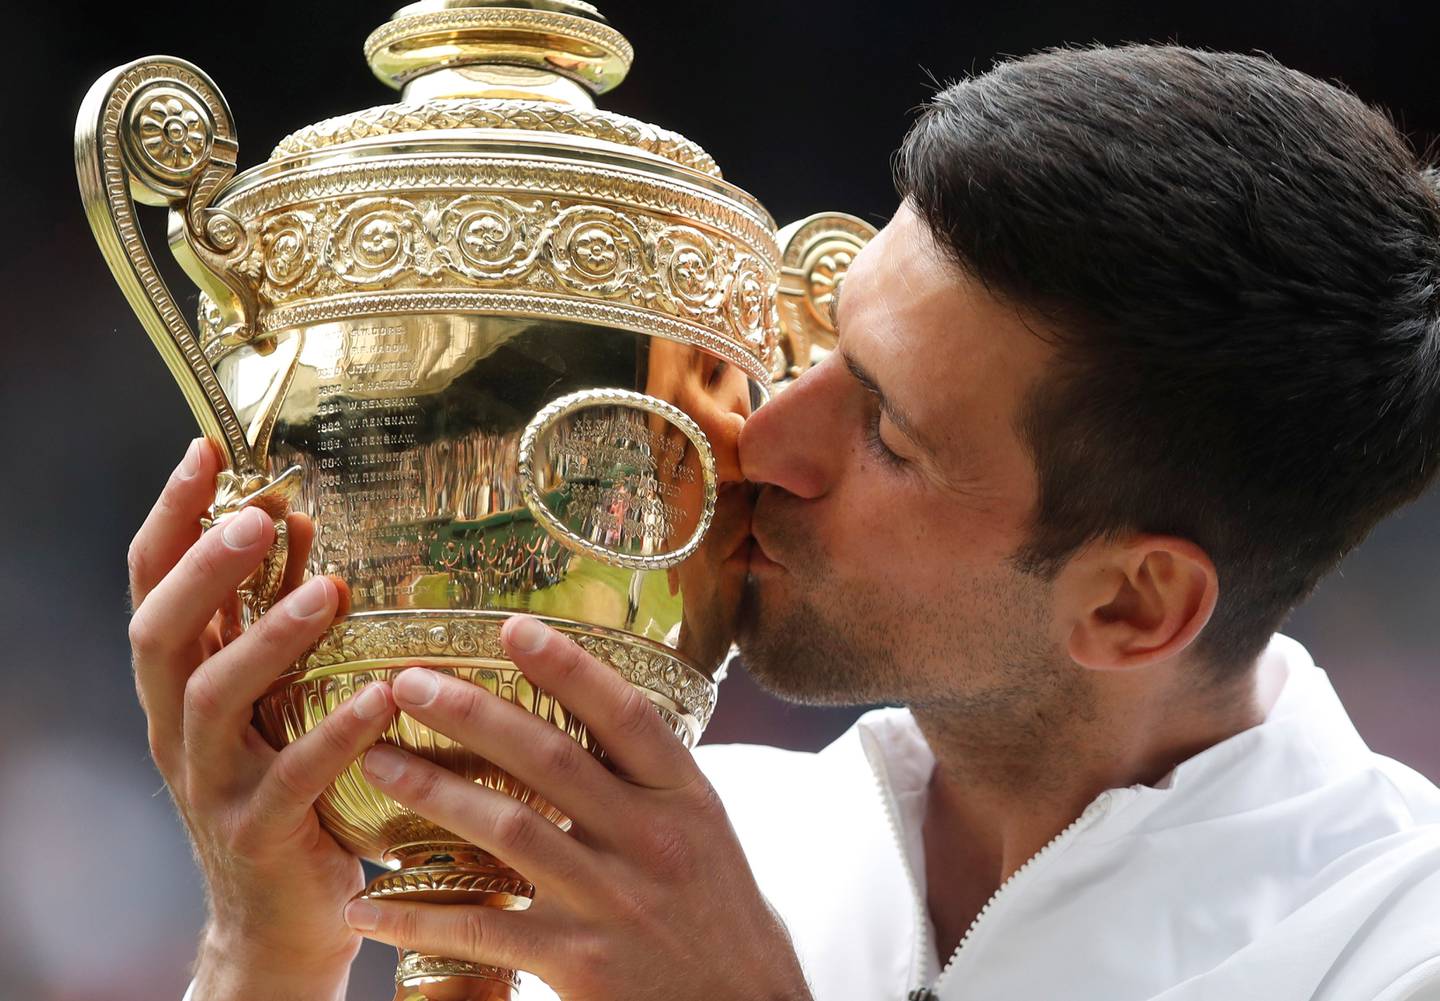 Serbia's World No 1 Novak Djokovic will be firm favourite in Tokyo after his recent Wimbledon win took him alongside Roger Federer and Rafa Nadal on 20 slam trophies -  and neither of those two are taking part.